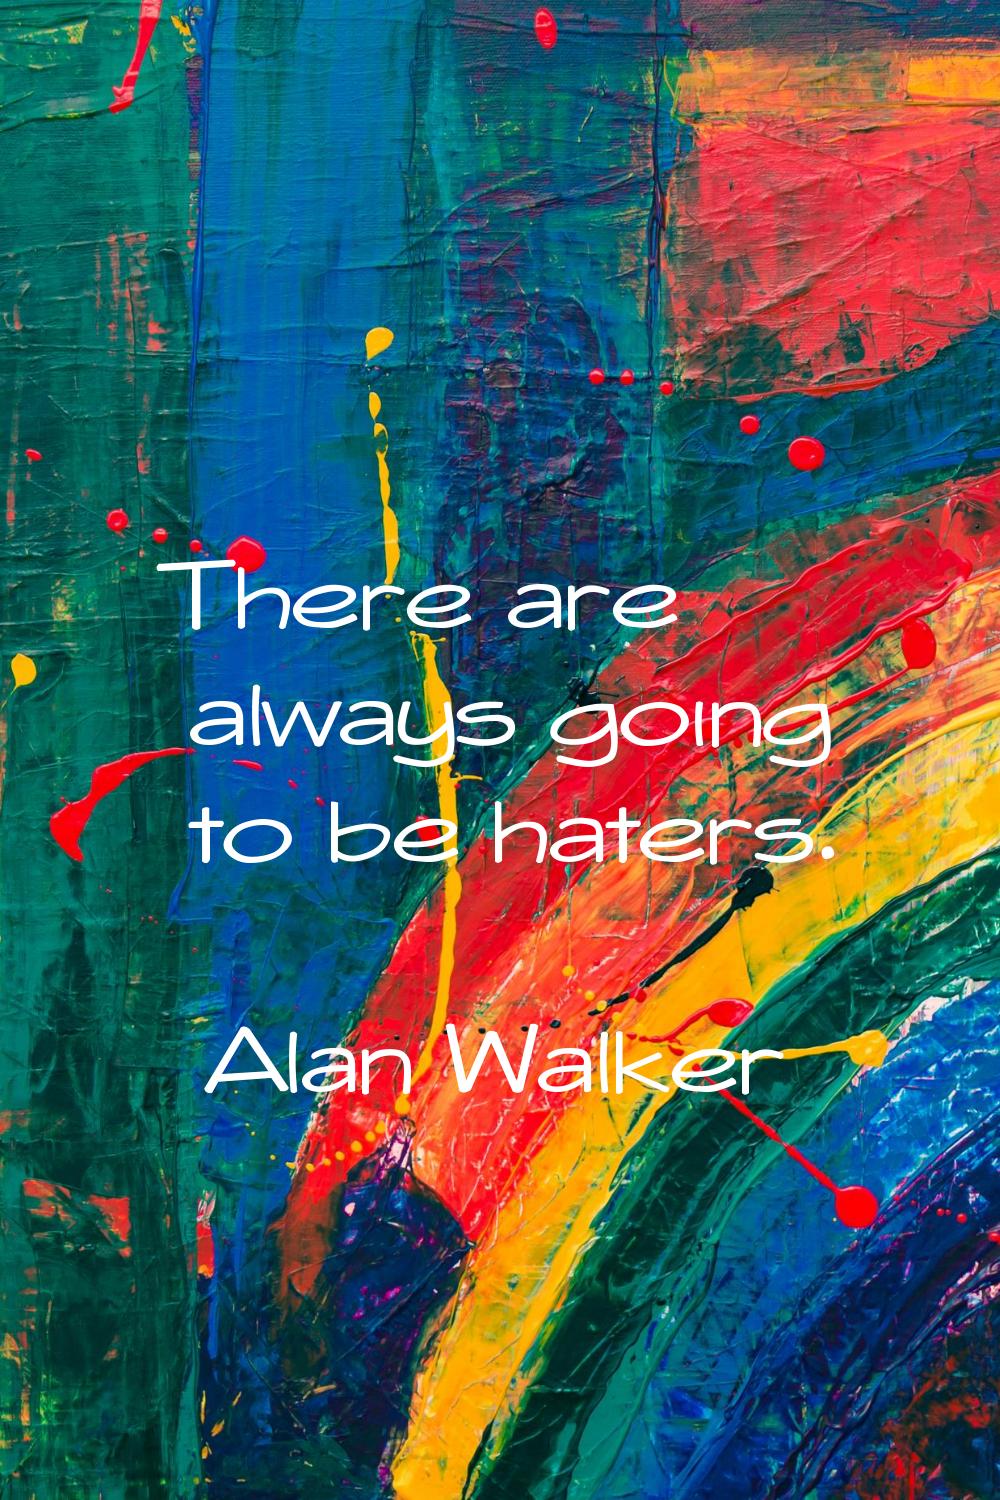 There are always going to be haters.